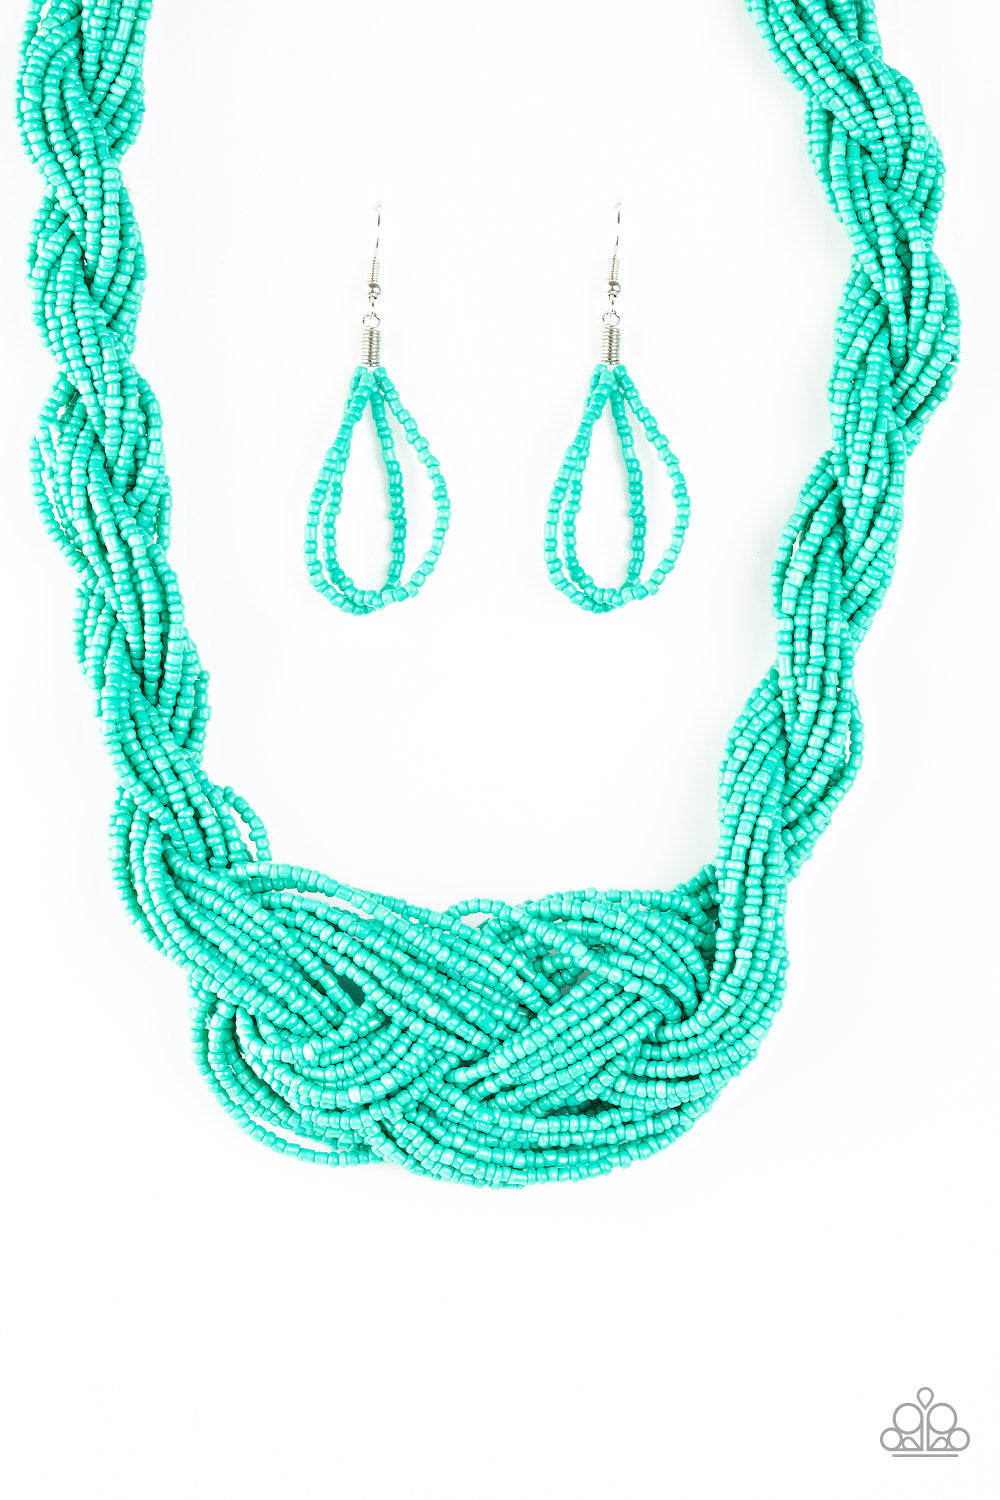 A Standing Ovation - Blue seed bead necklace